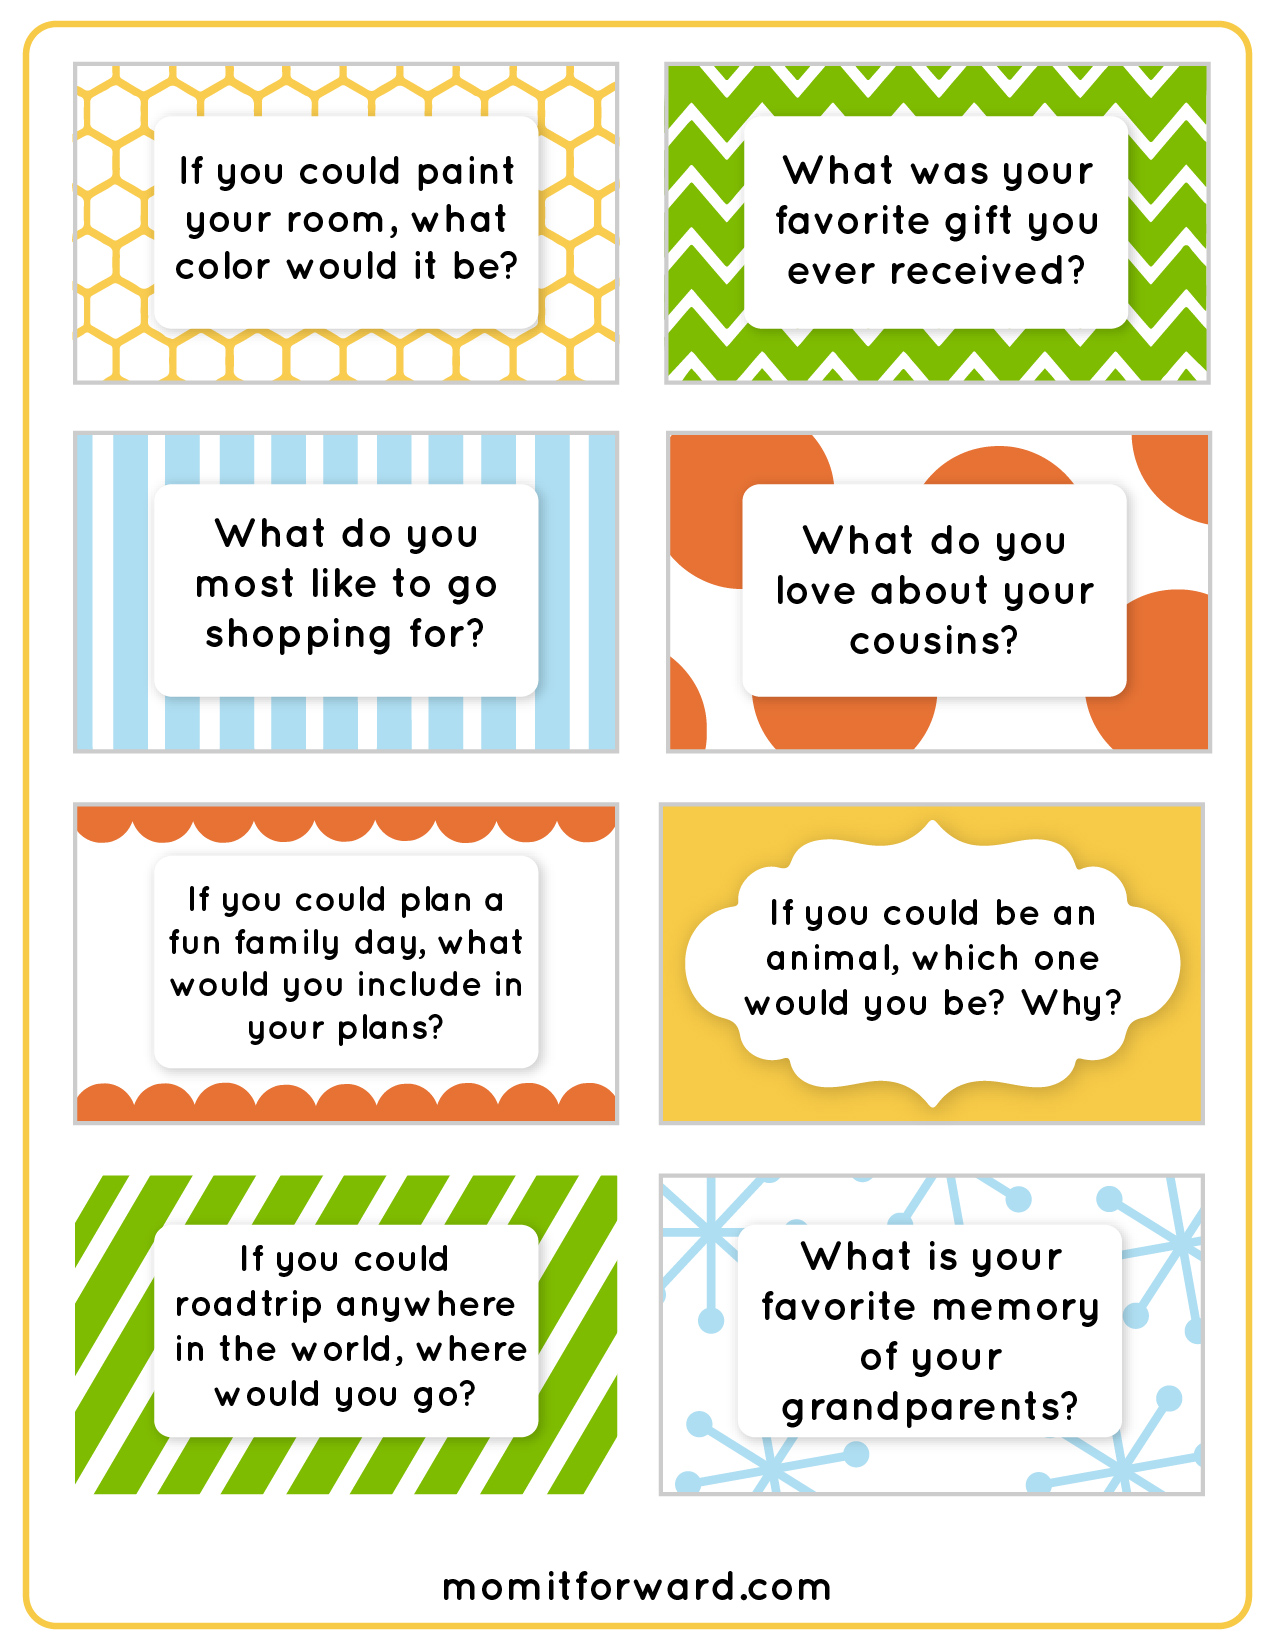 Questions for teenagers. Карточки для speaking. Conversation Cards. Вопросы food for speaking. Карточки conversation.